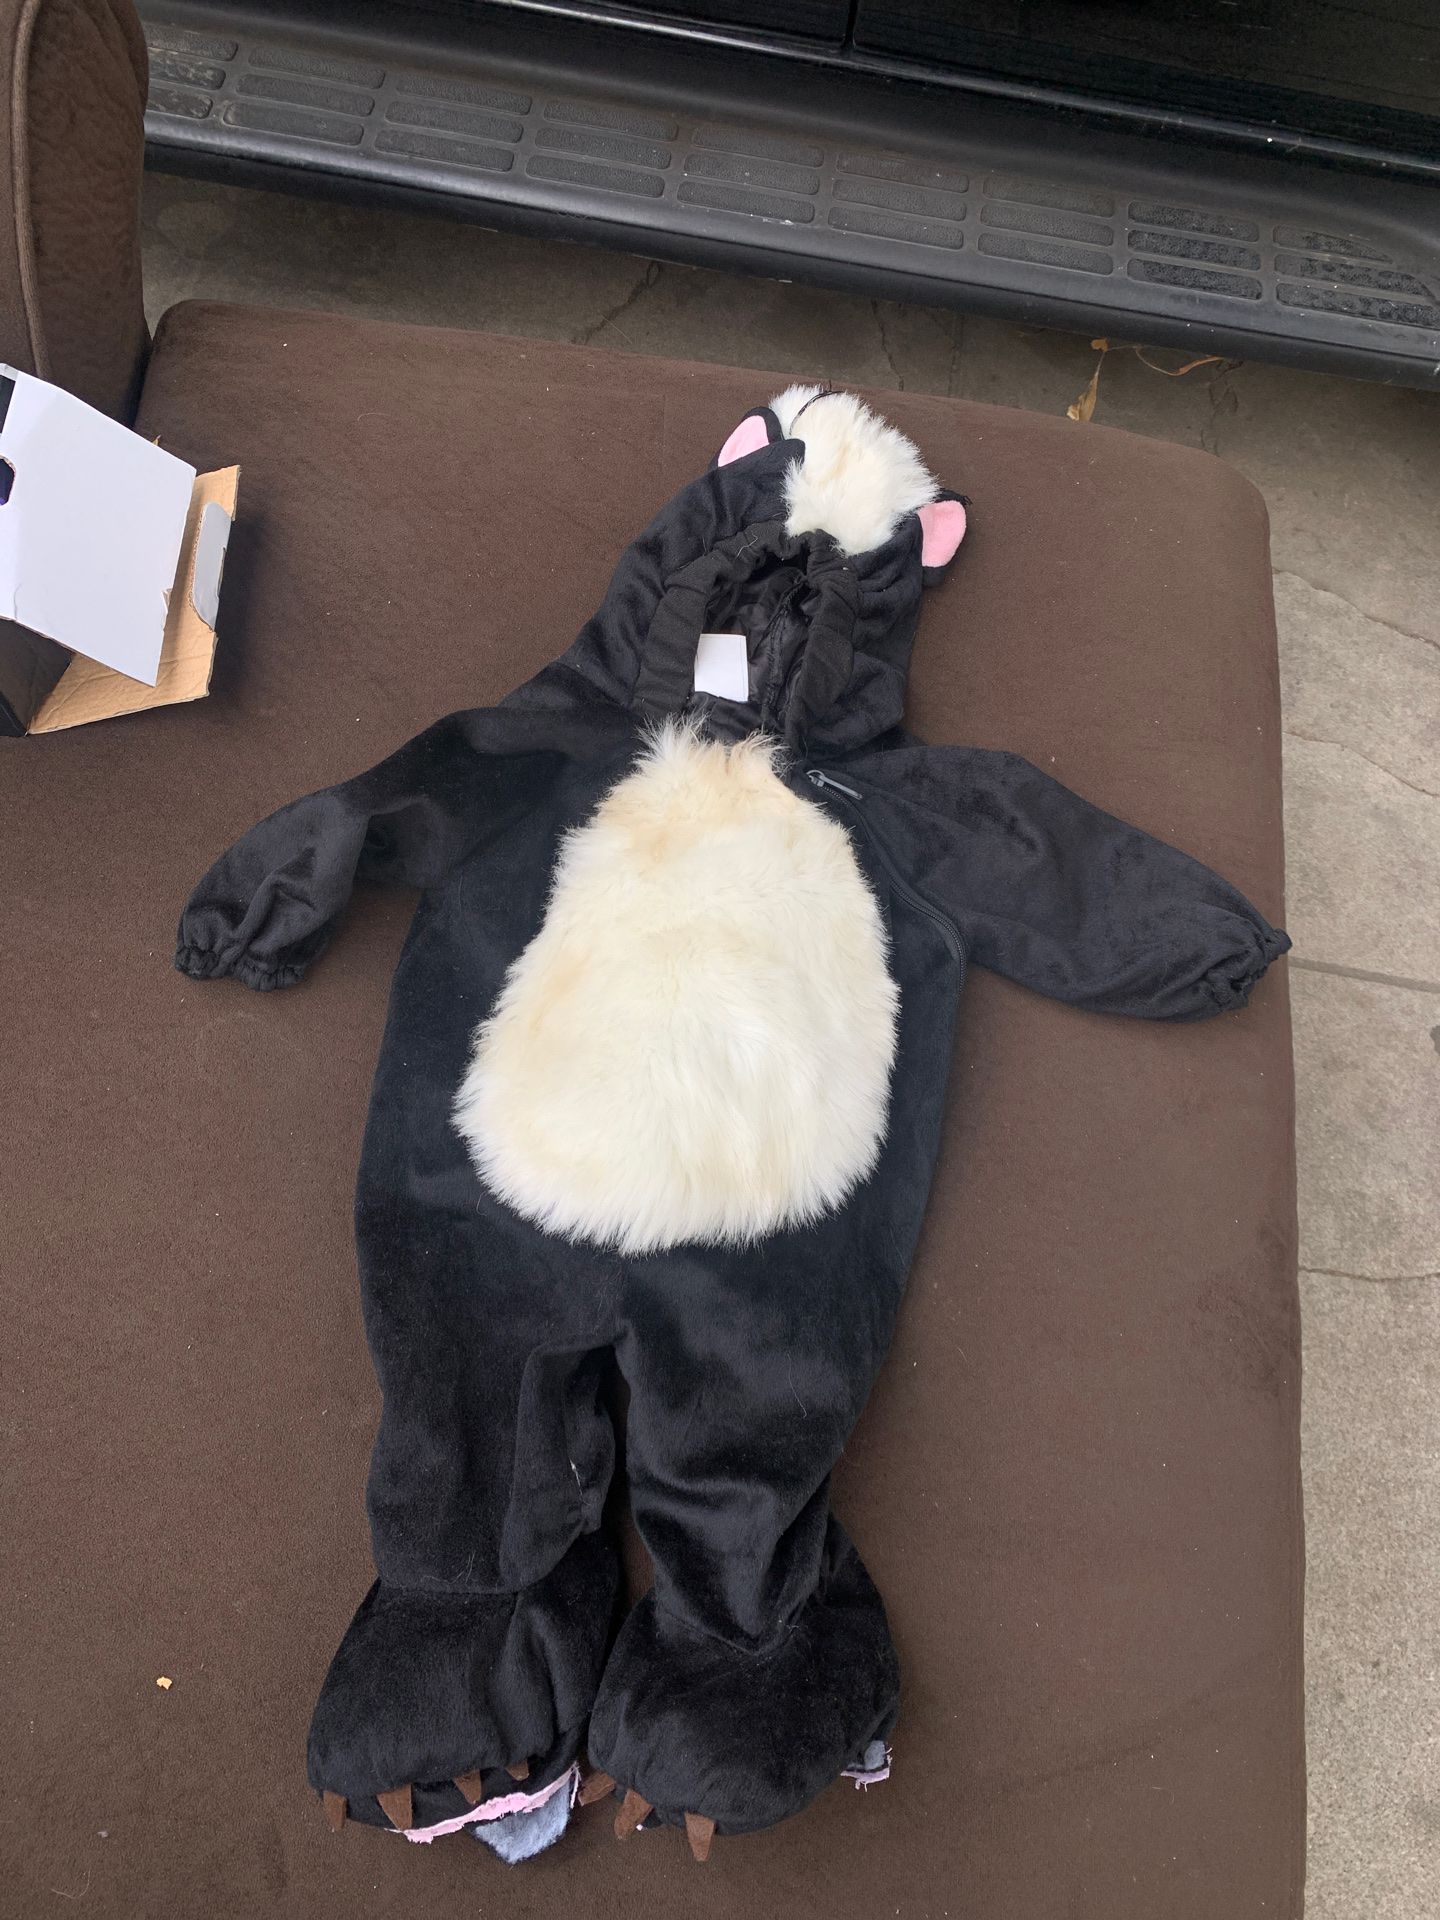 Skunk costume 6to 12 months $5